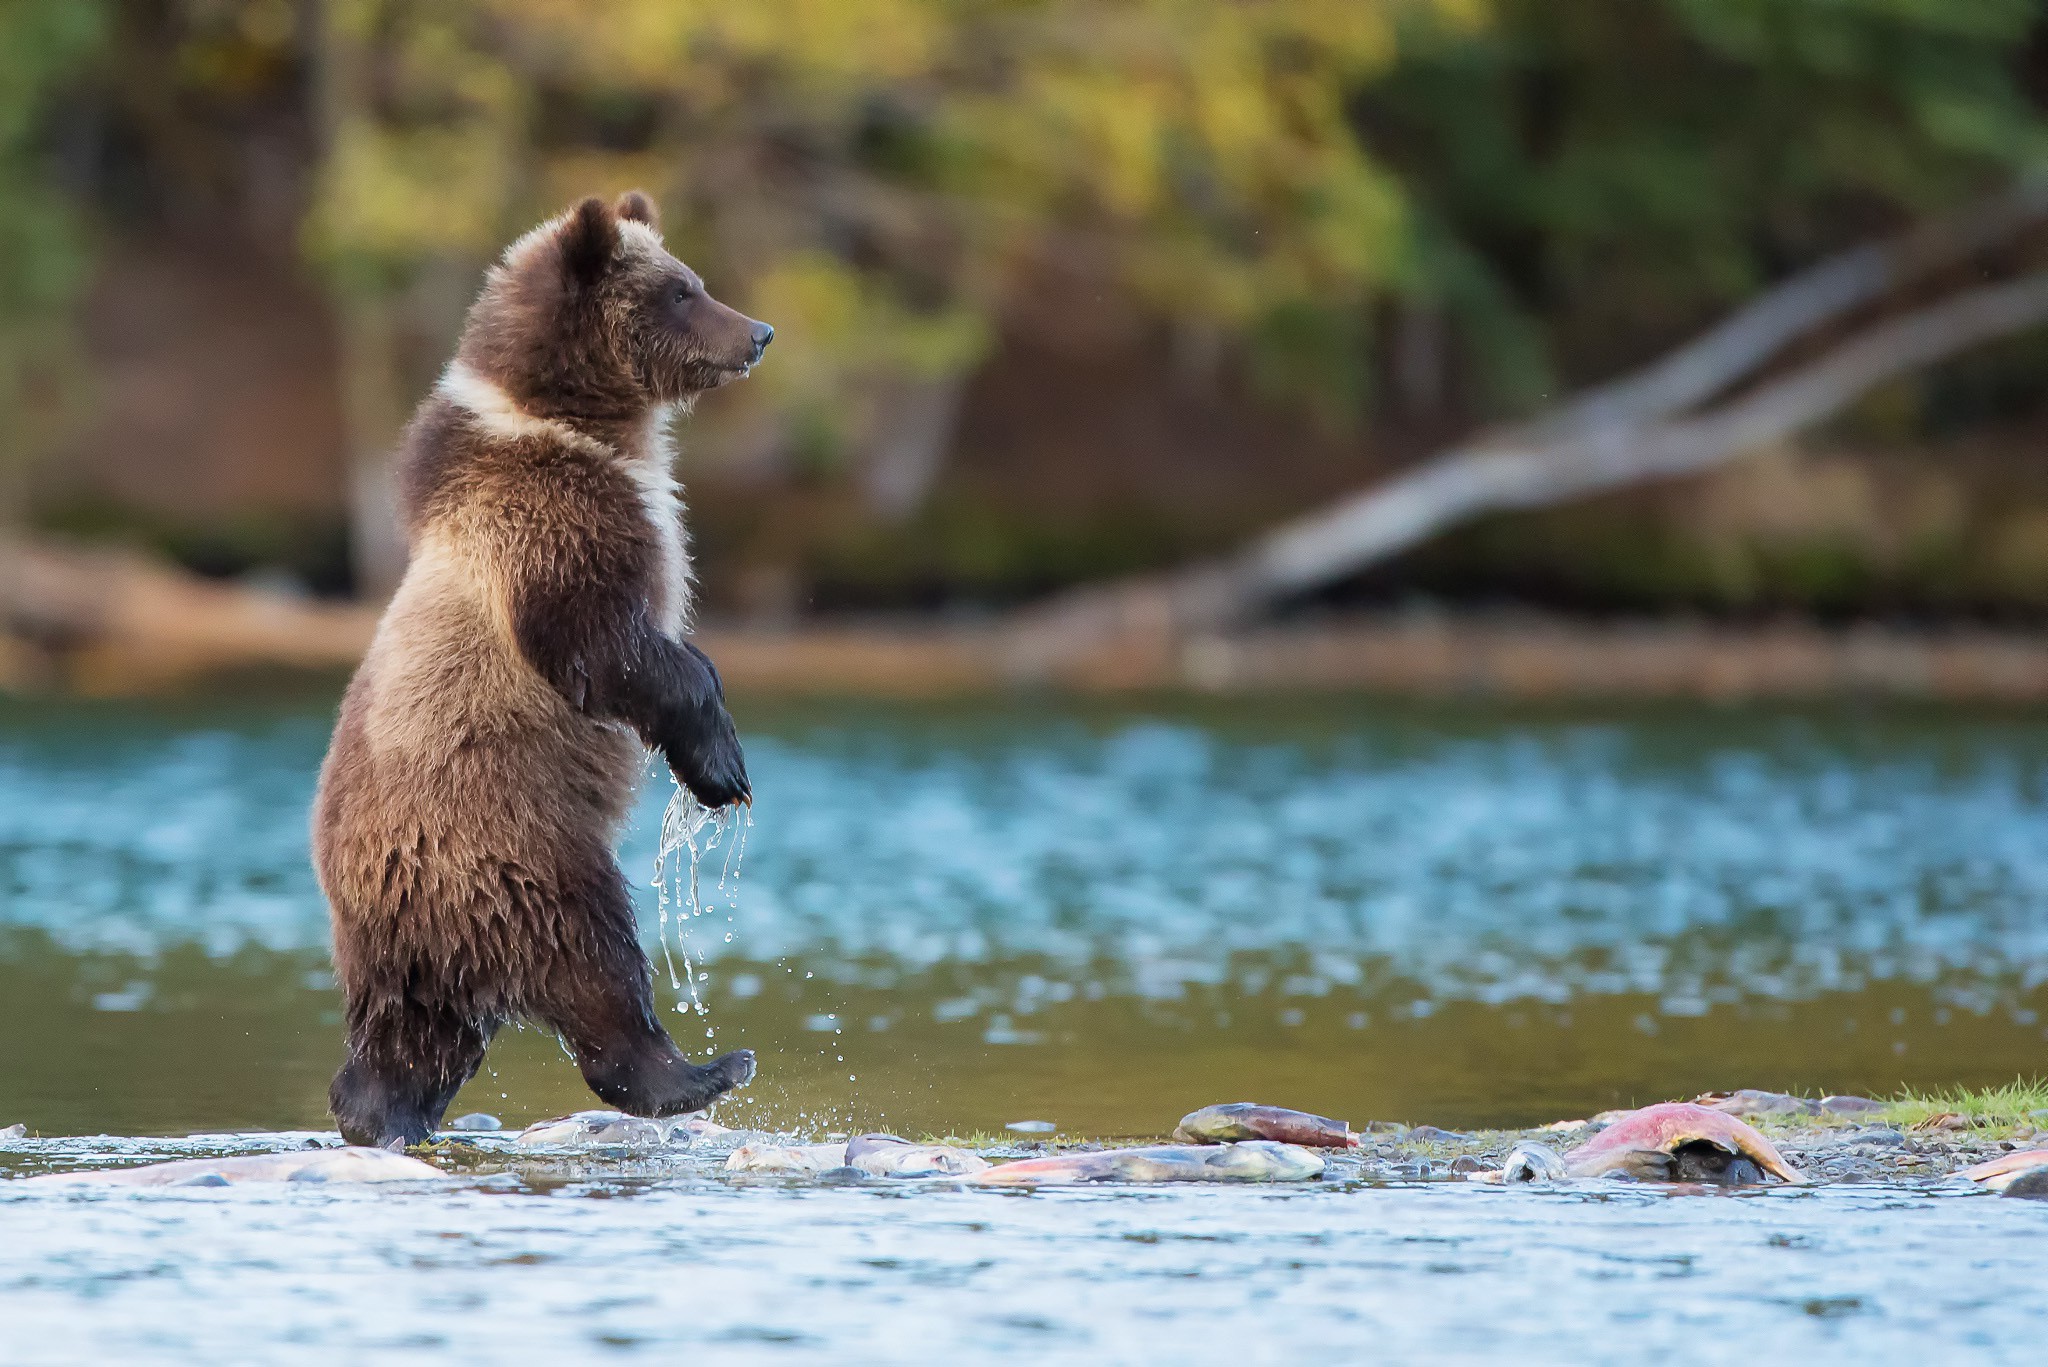 bears, Nature, Animals, River, Baby Animals, Grizzly Bears, Grizzly Bear Wallpaper